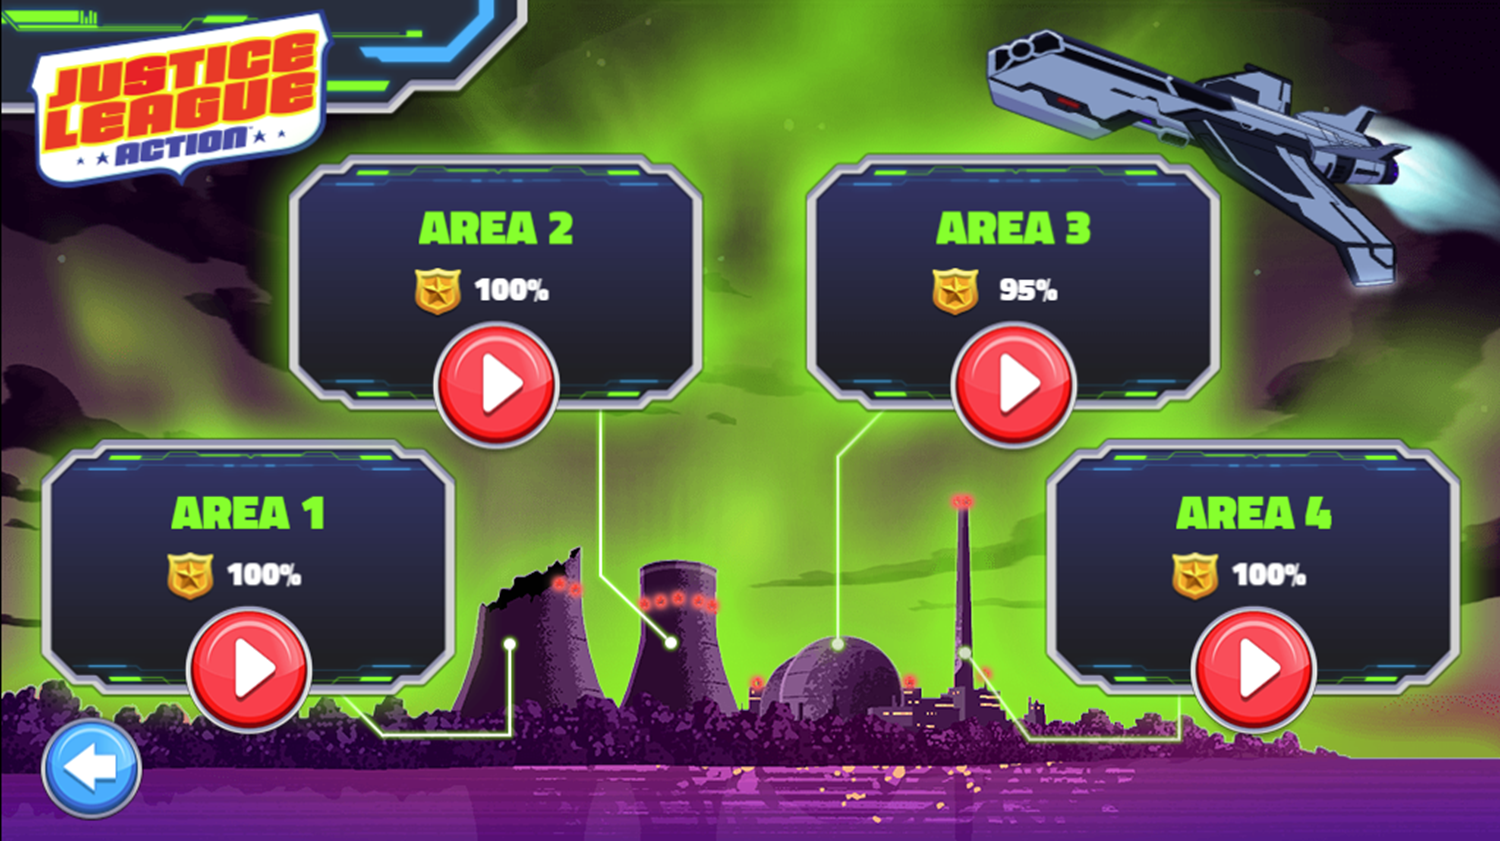 Justice League Action Nuclear Rescue Game Level Select Complete Screenshot.